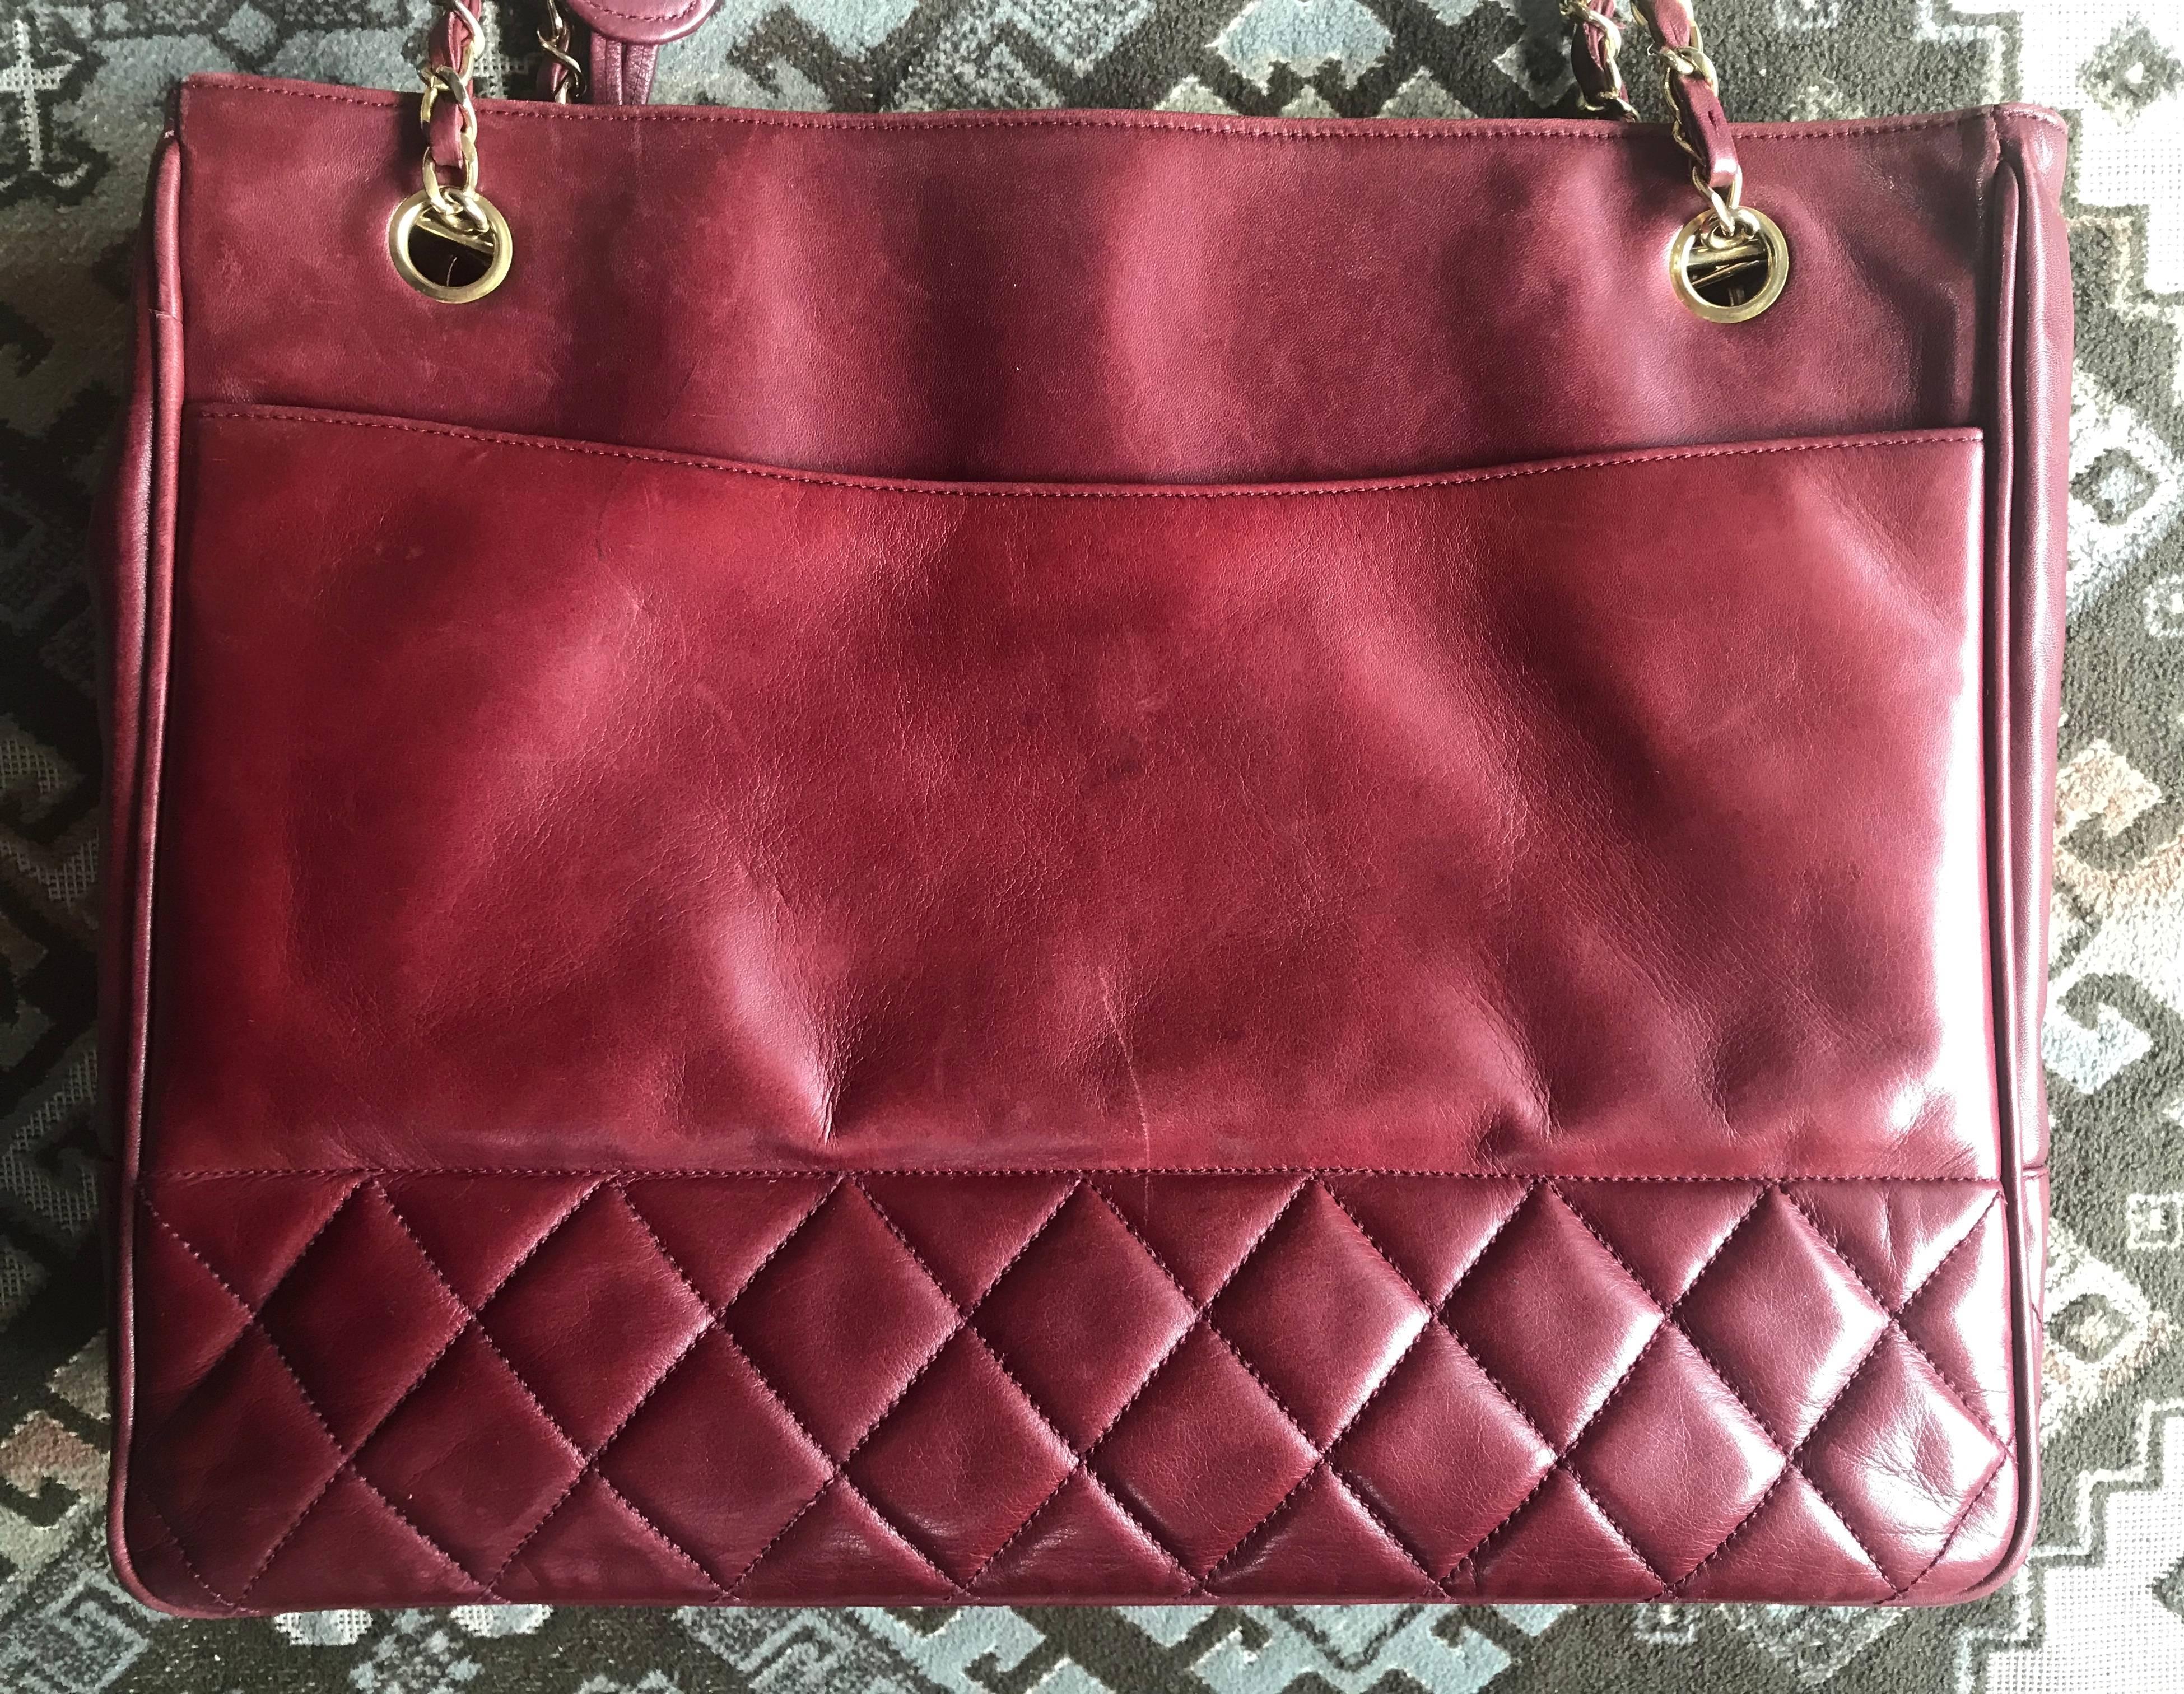 Chanel Vintage wine leather tote bag with gold chain handles and CC motif charm In Good Condition For Sale In Kashiwa, Chiba